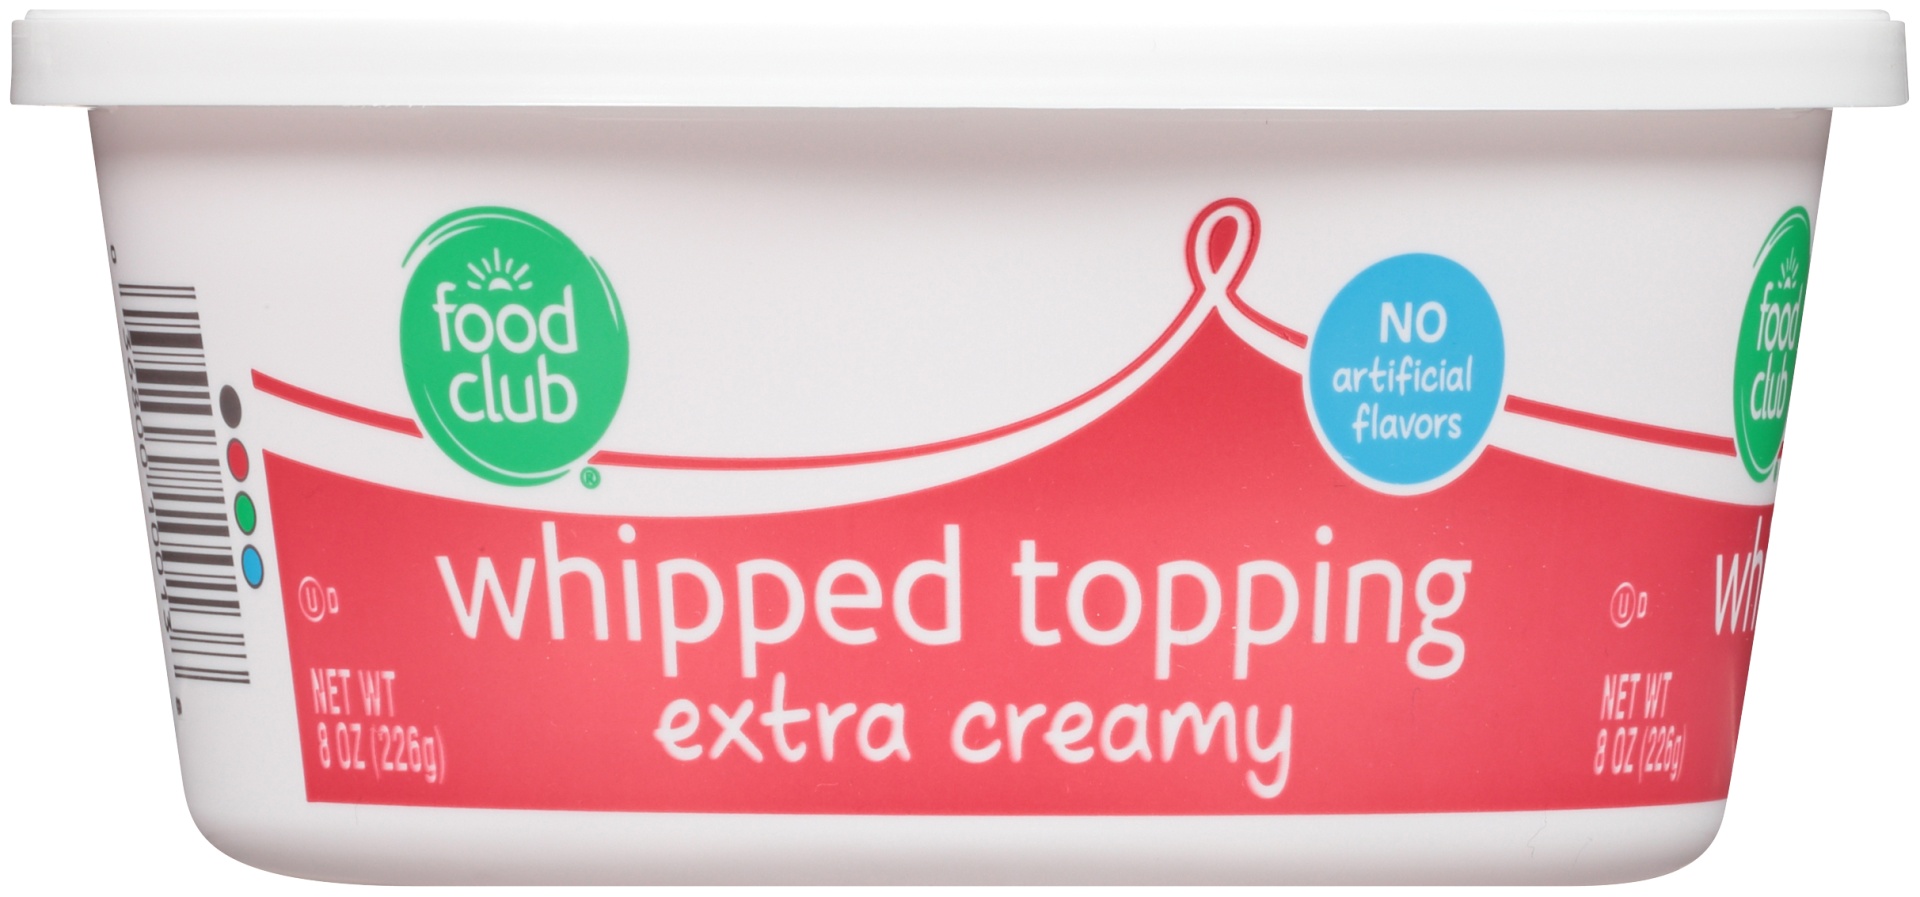 slide 5 of 6, Food Club Whipped Topping Extra Creamy, 8 oz